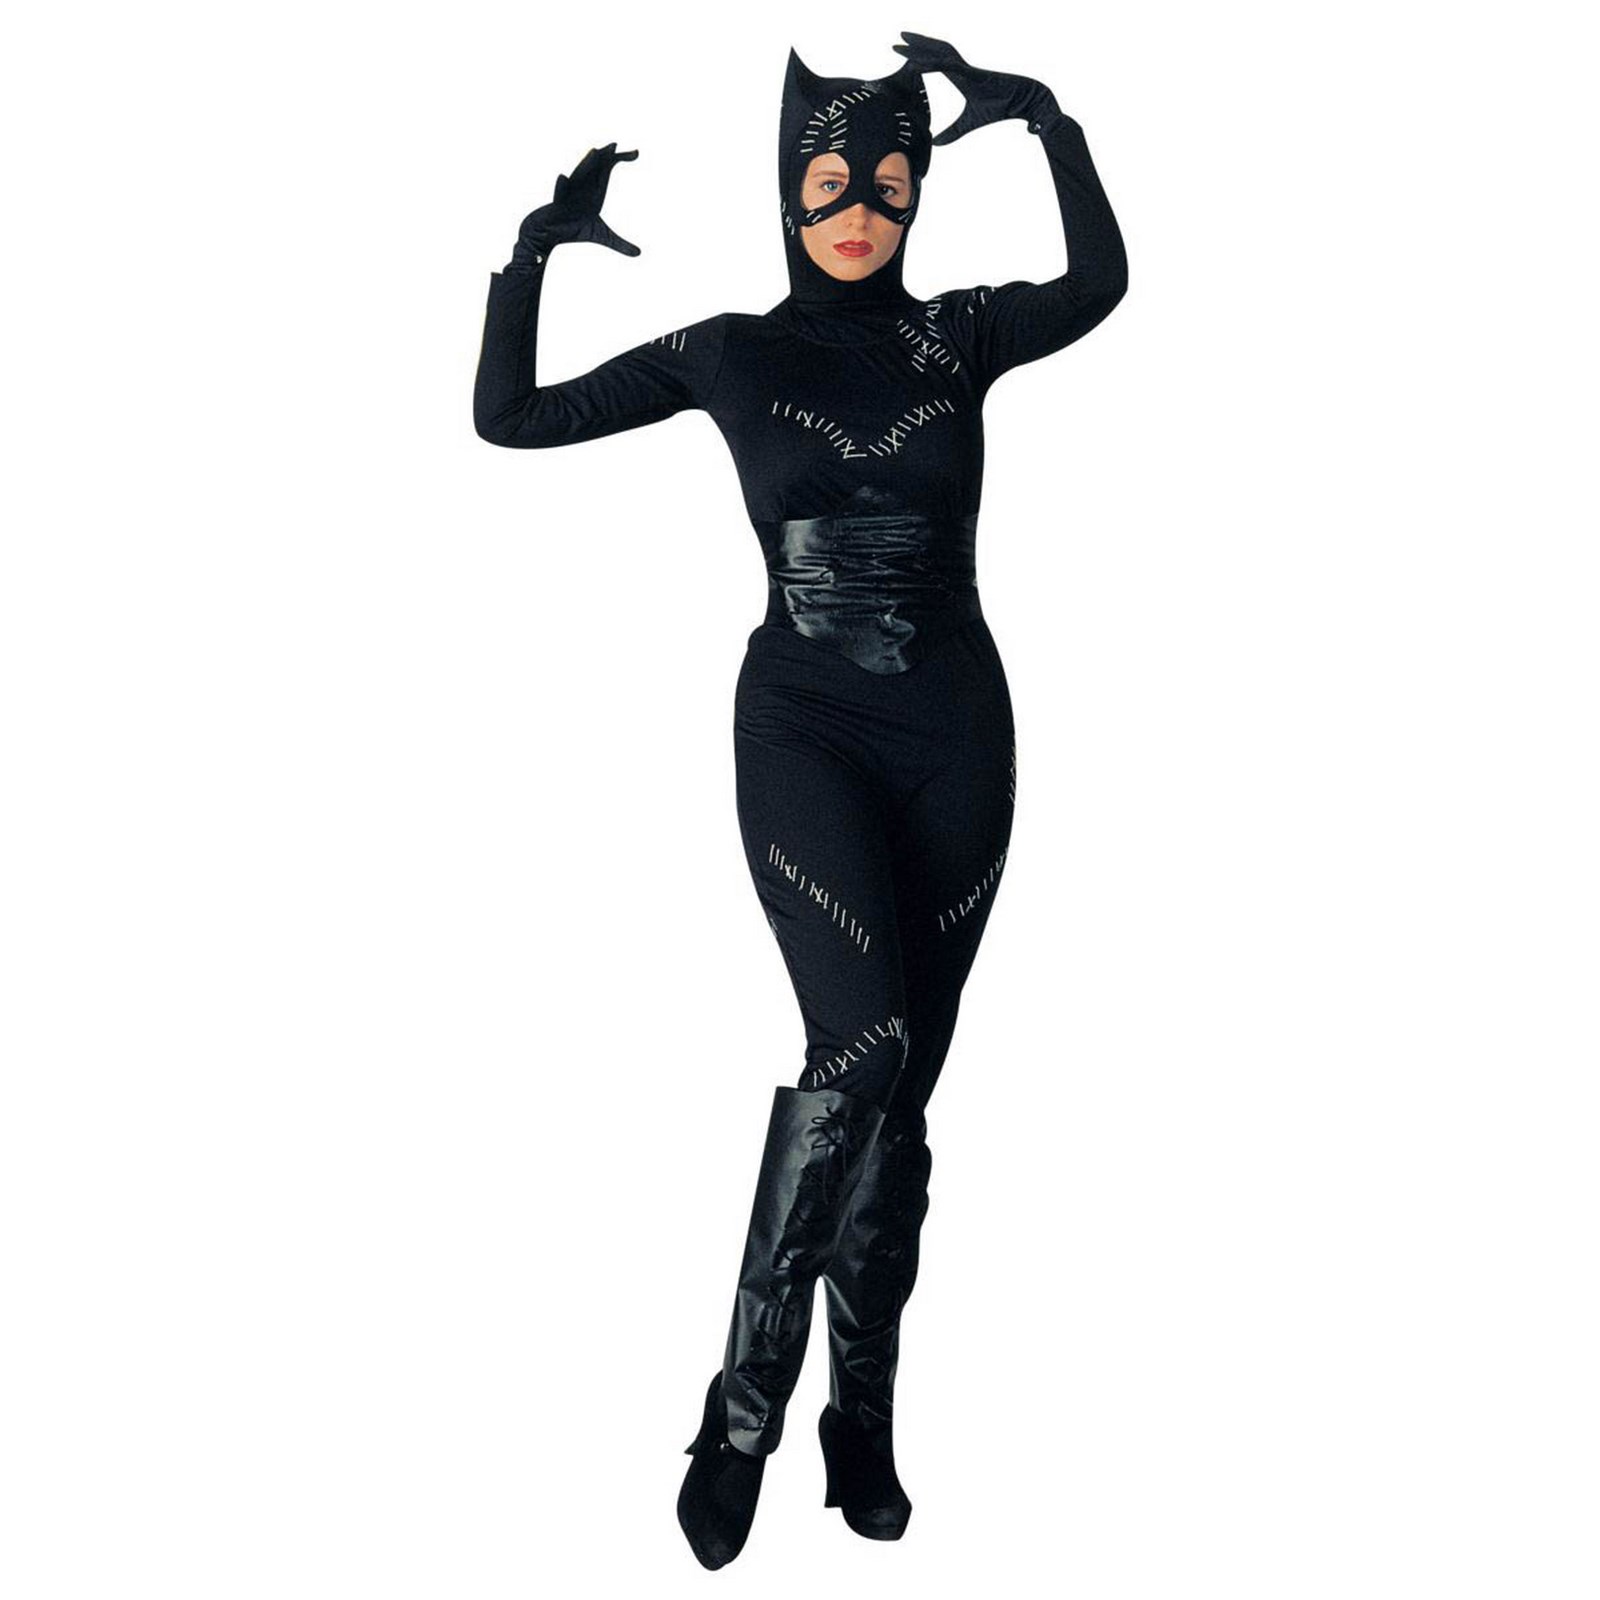 Women's Catwoman Costume - image 1 of 2